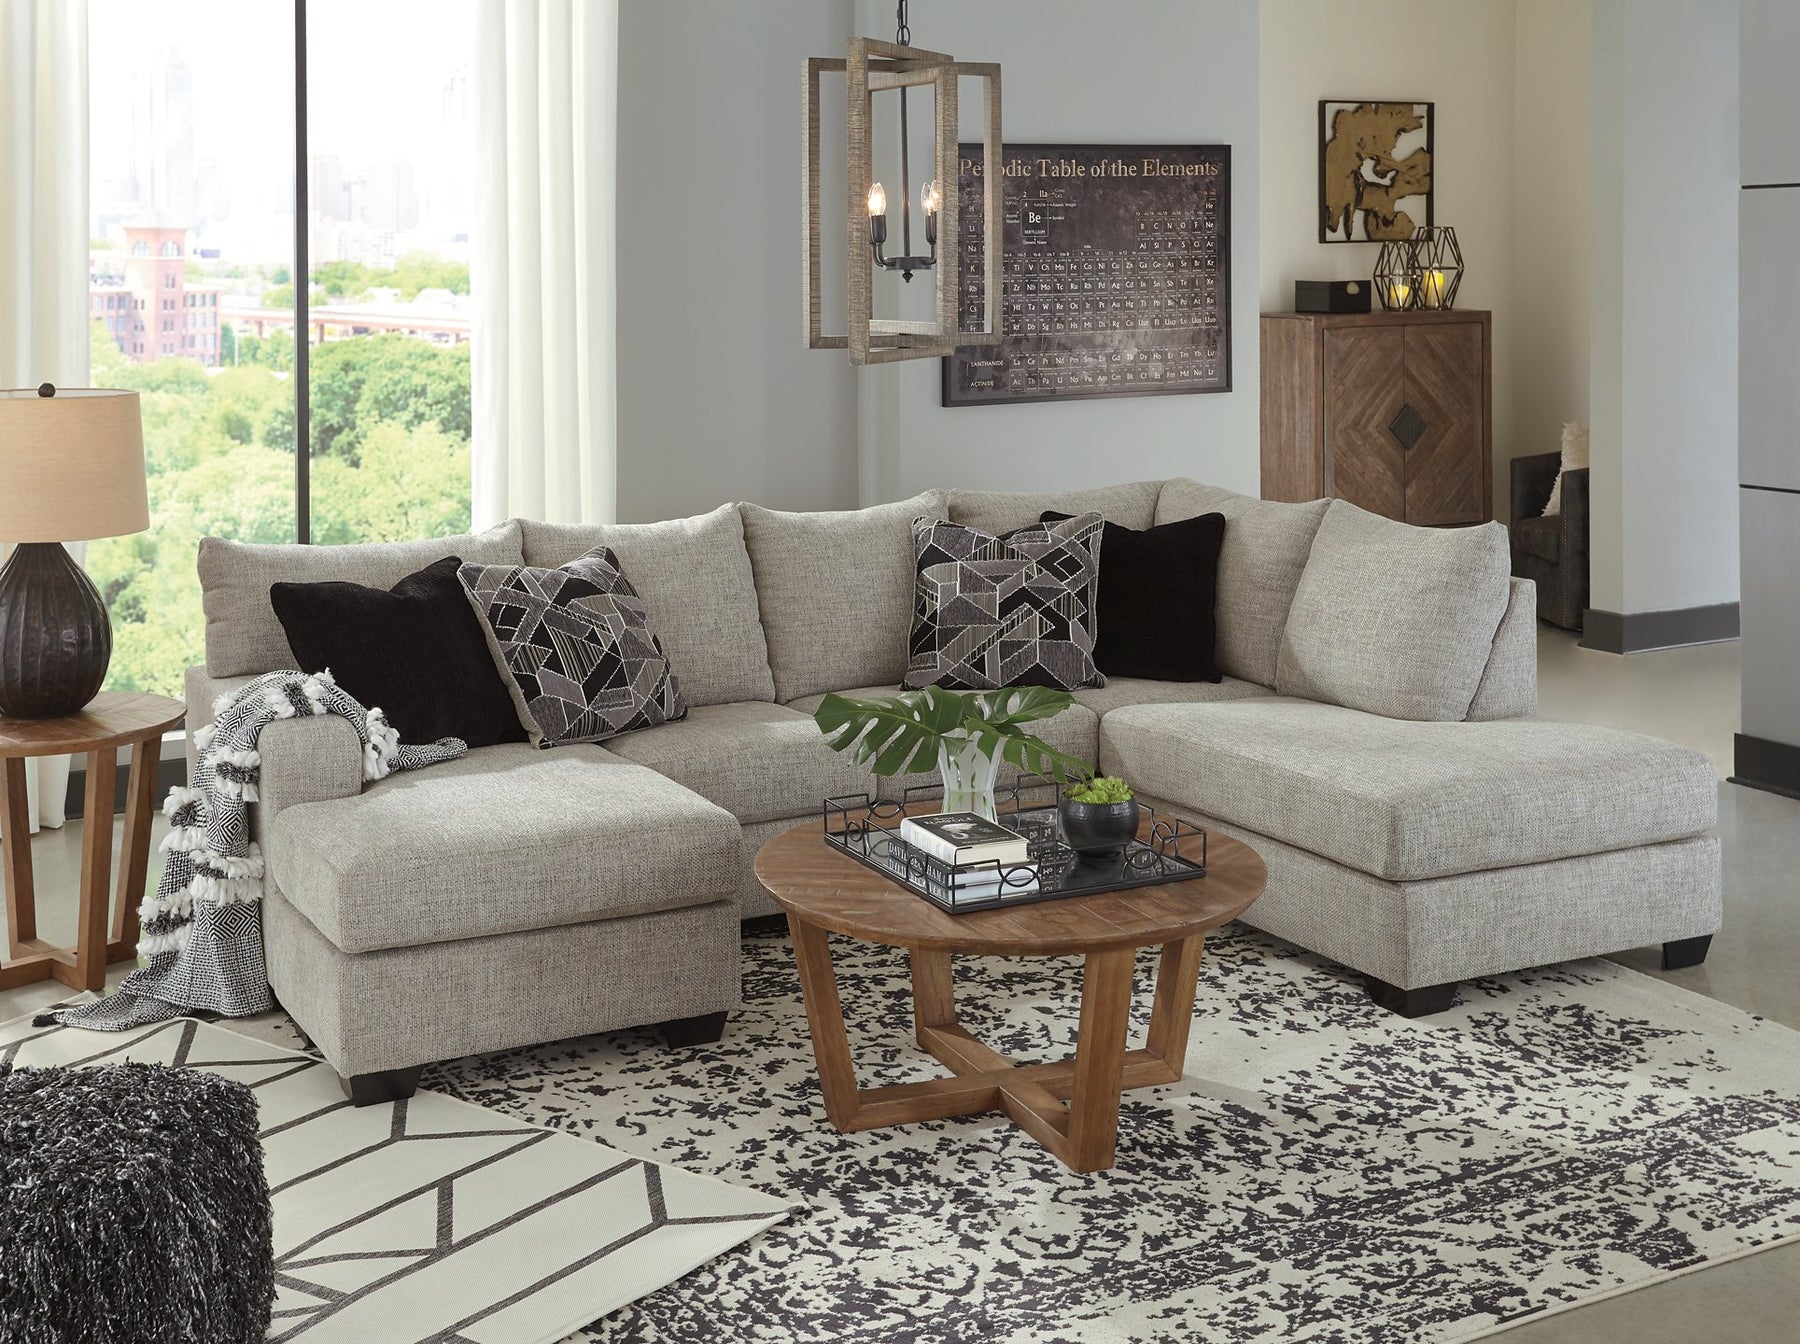 Megginson 2-Piece Sectional with Chaise - Half Price Furniture